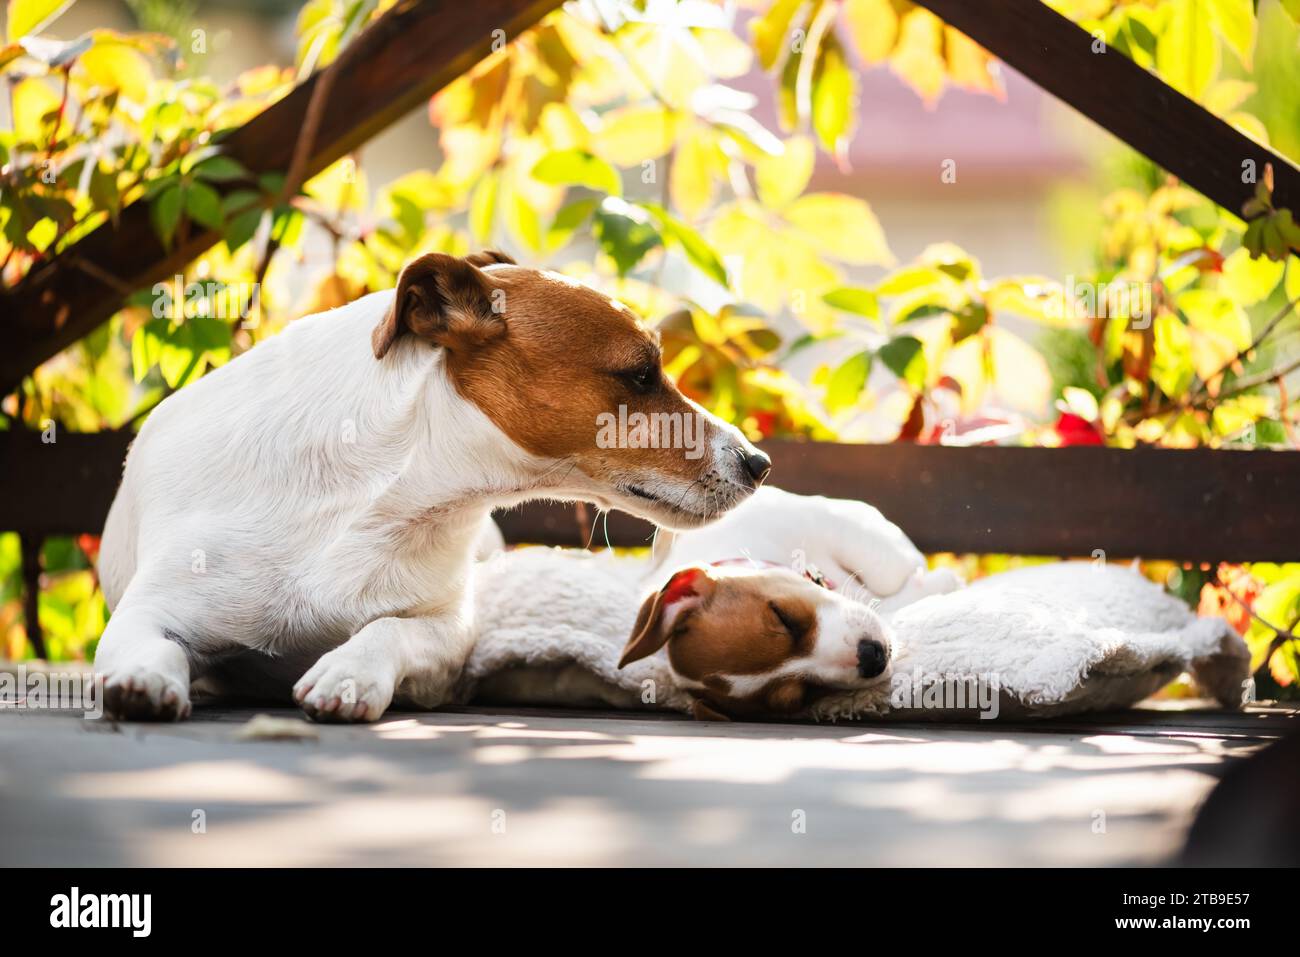 Jack russell terrier puppy on white carpet on wooden terrace close up. Dogs and pets photography Stock Photo